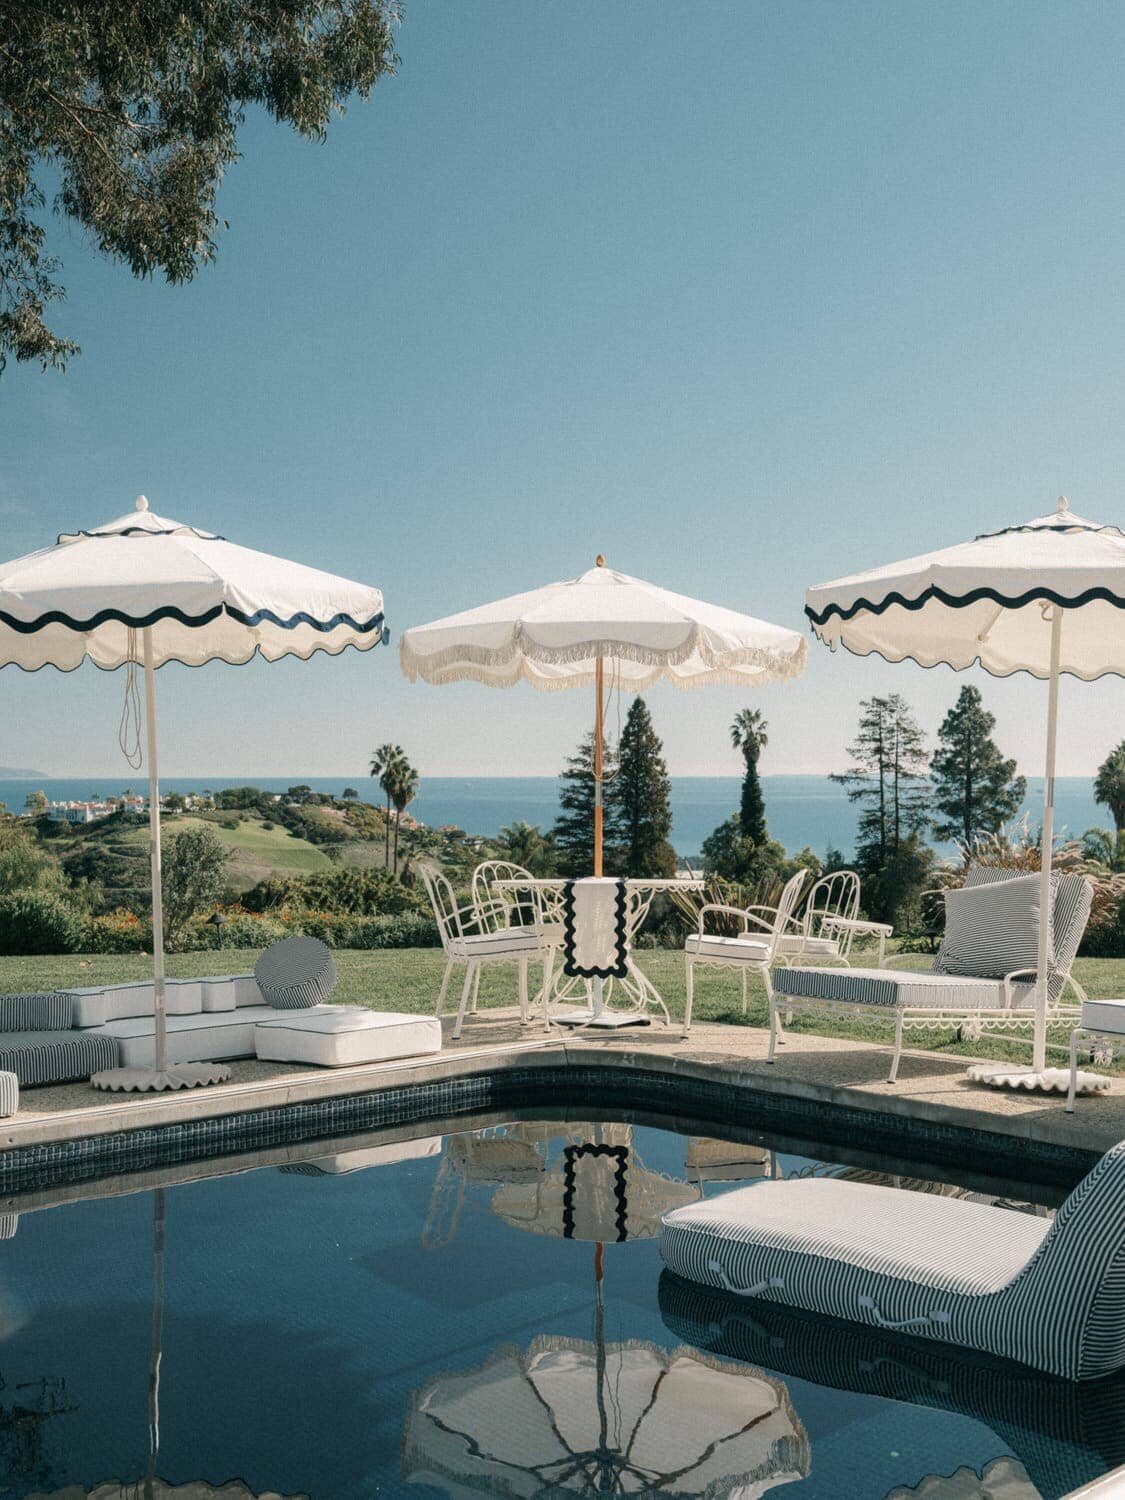 Outdoor pool setting with riviera white market umbrella, table and chairs. 